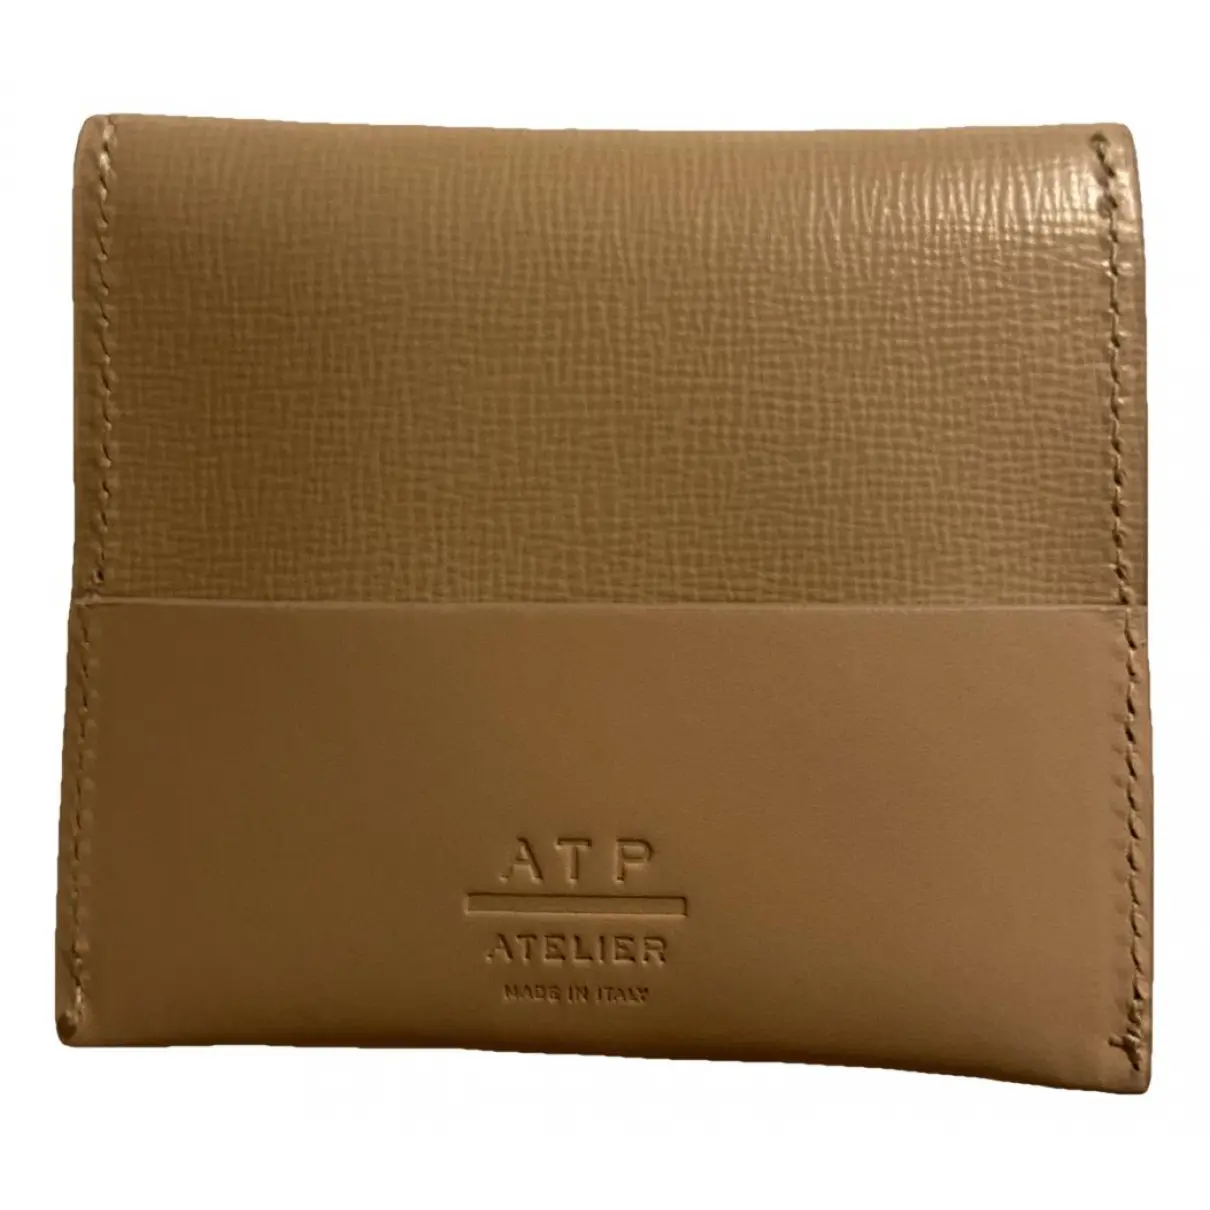 Buy ATP Atelier Leather card wallet online